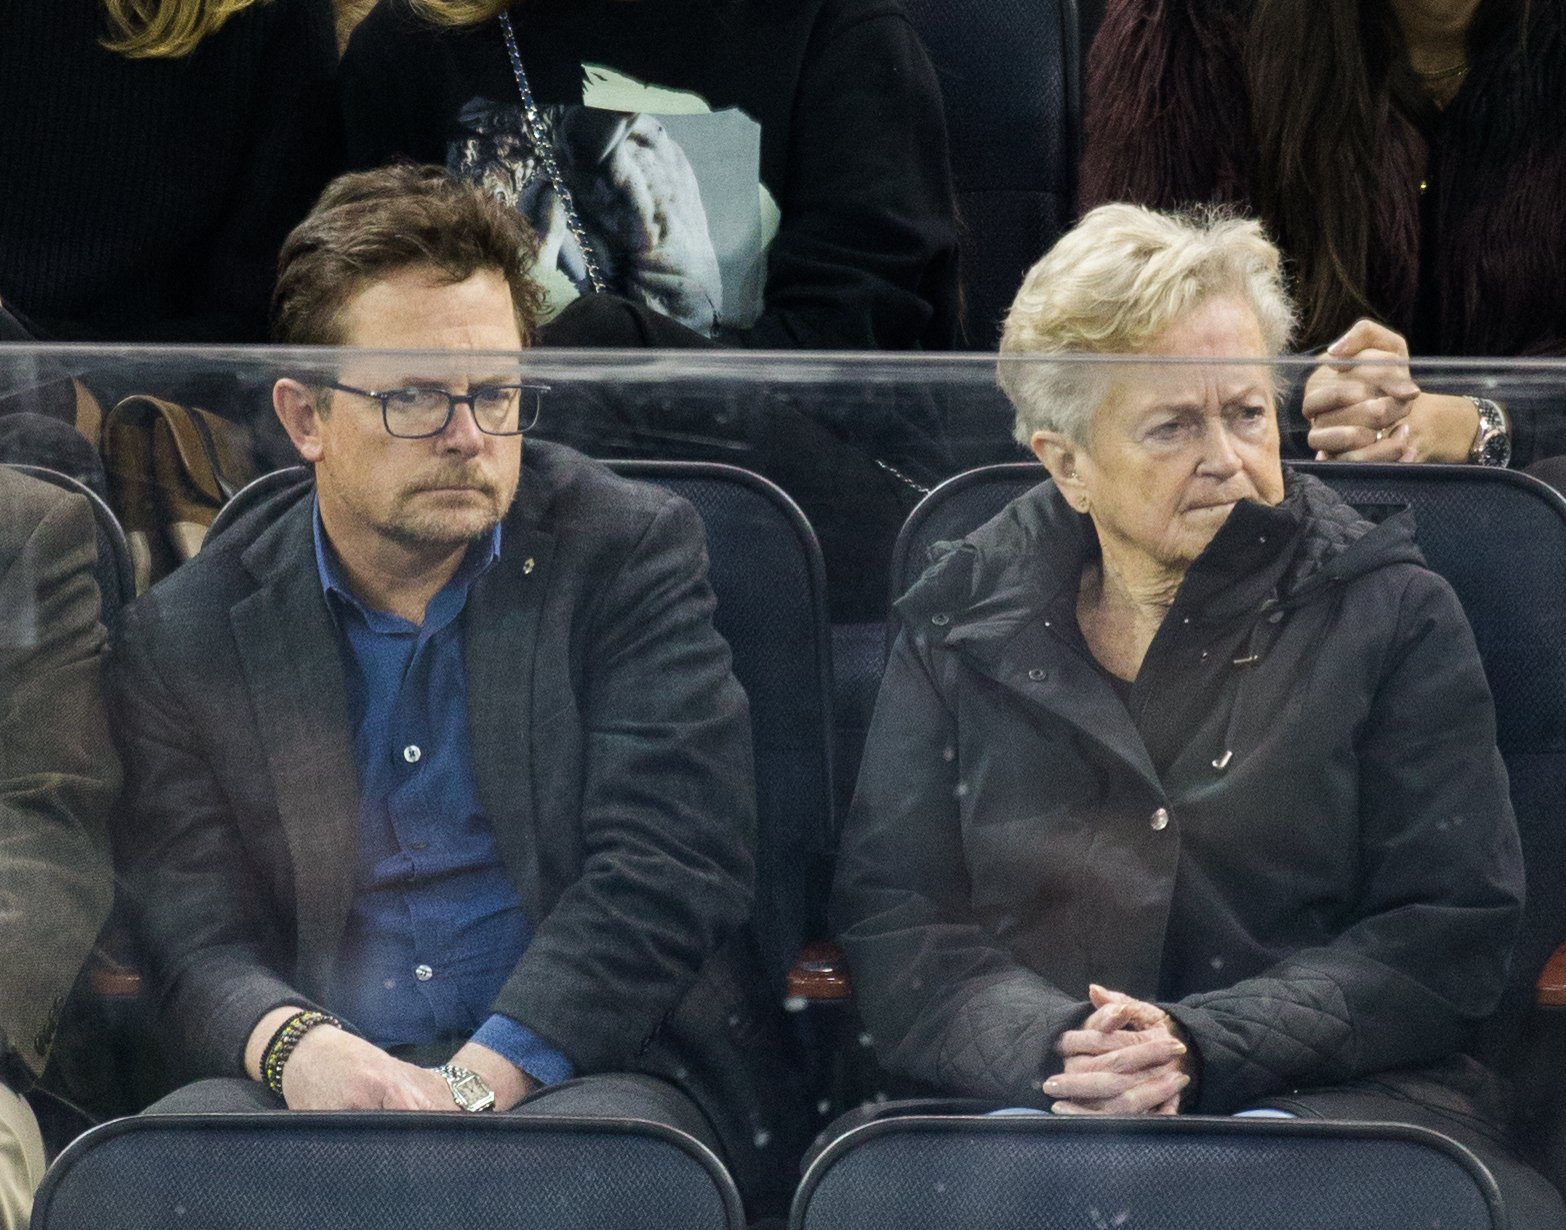 Michael J. Fox and Phyllis Piper at Toronto Maple Leafs Vs. New York Rangers at Madison Square Garden on January 13, 2017, in New York City | Source: Getty Images